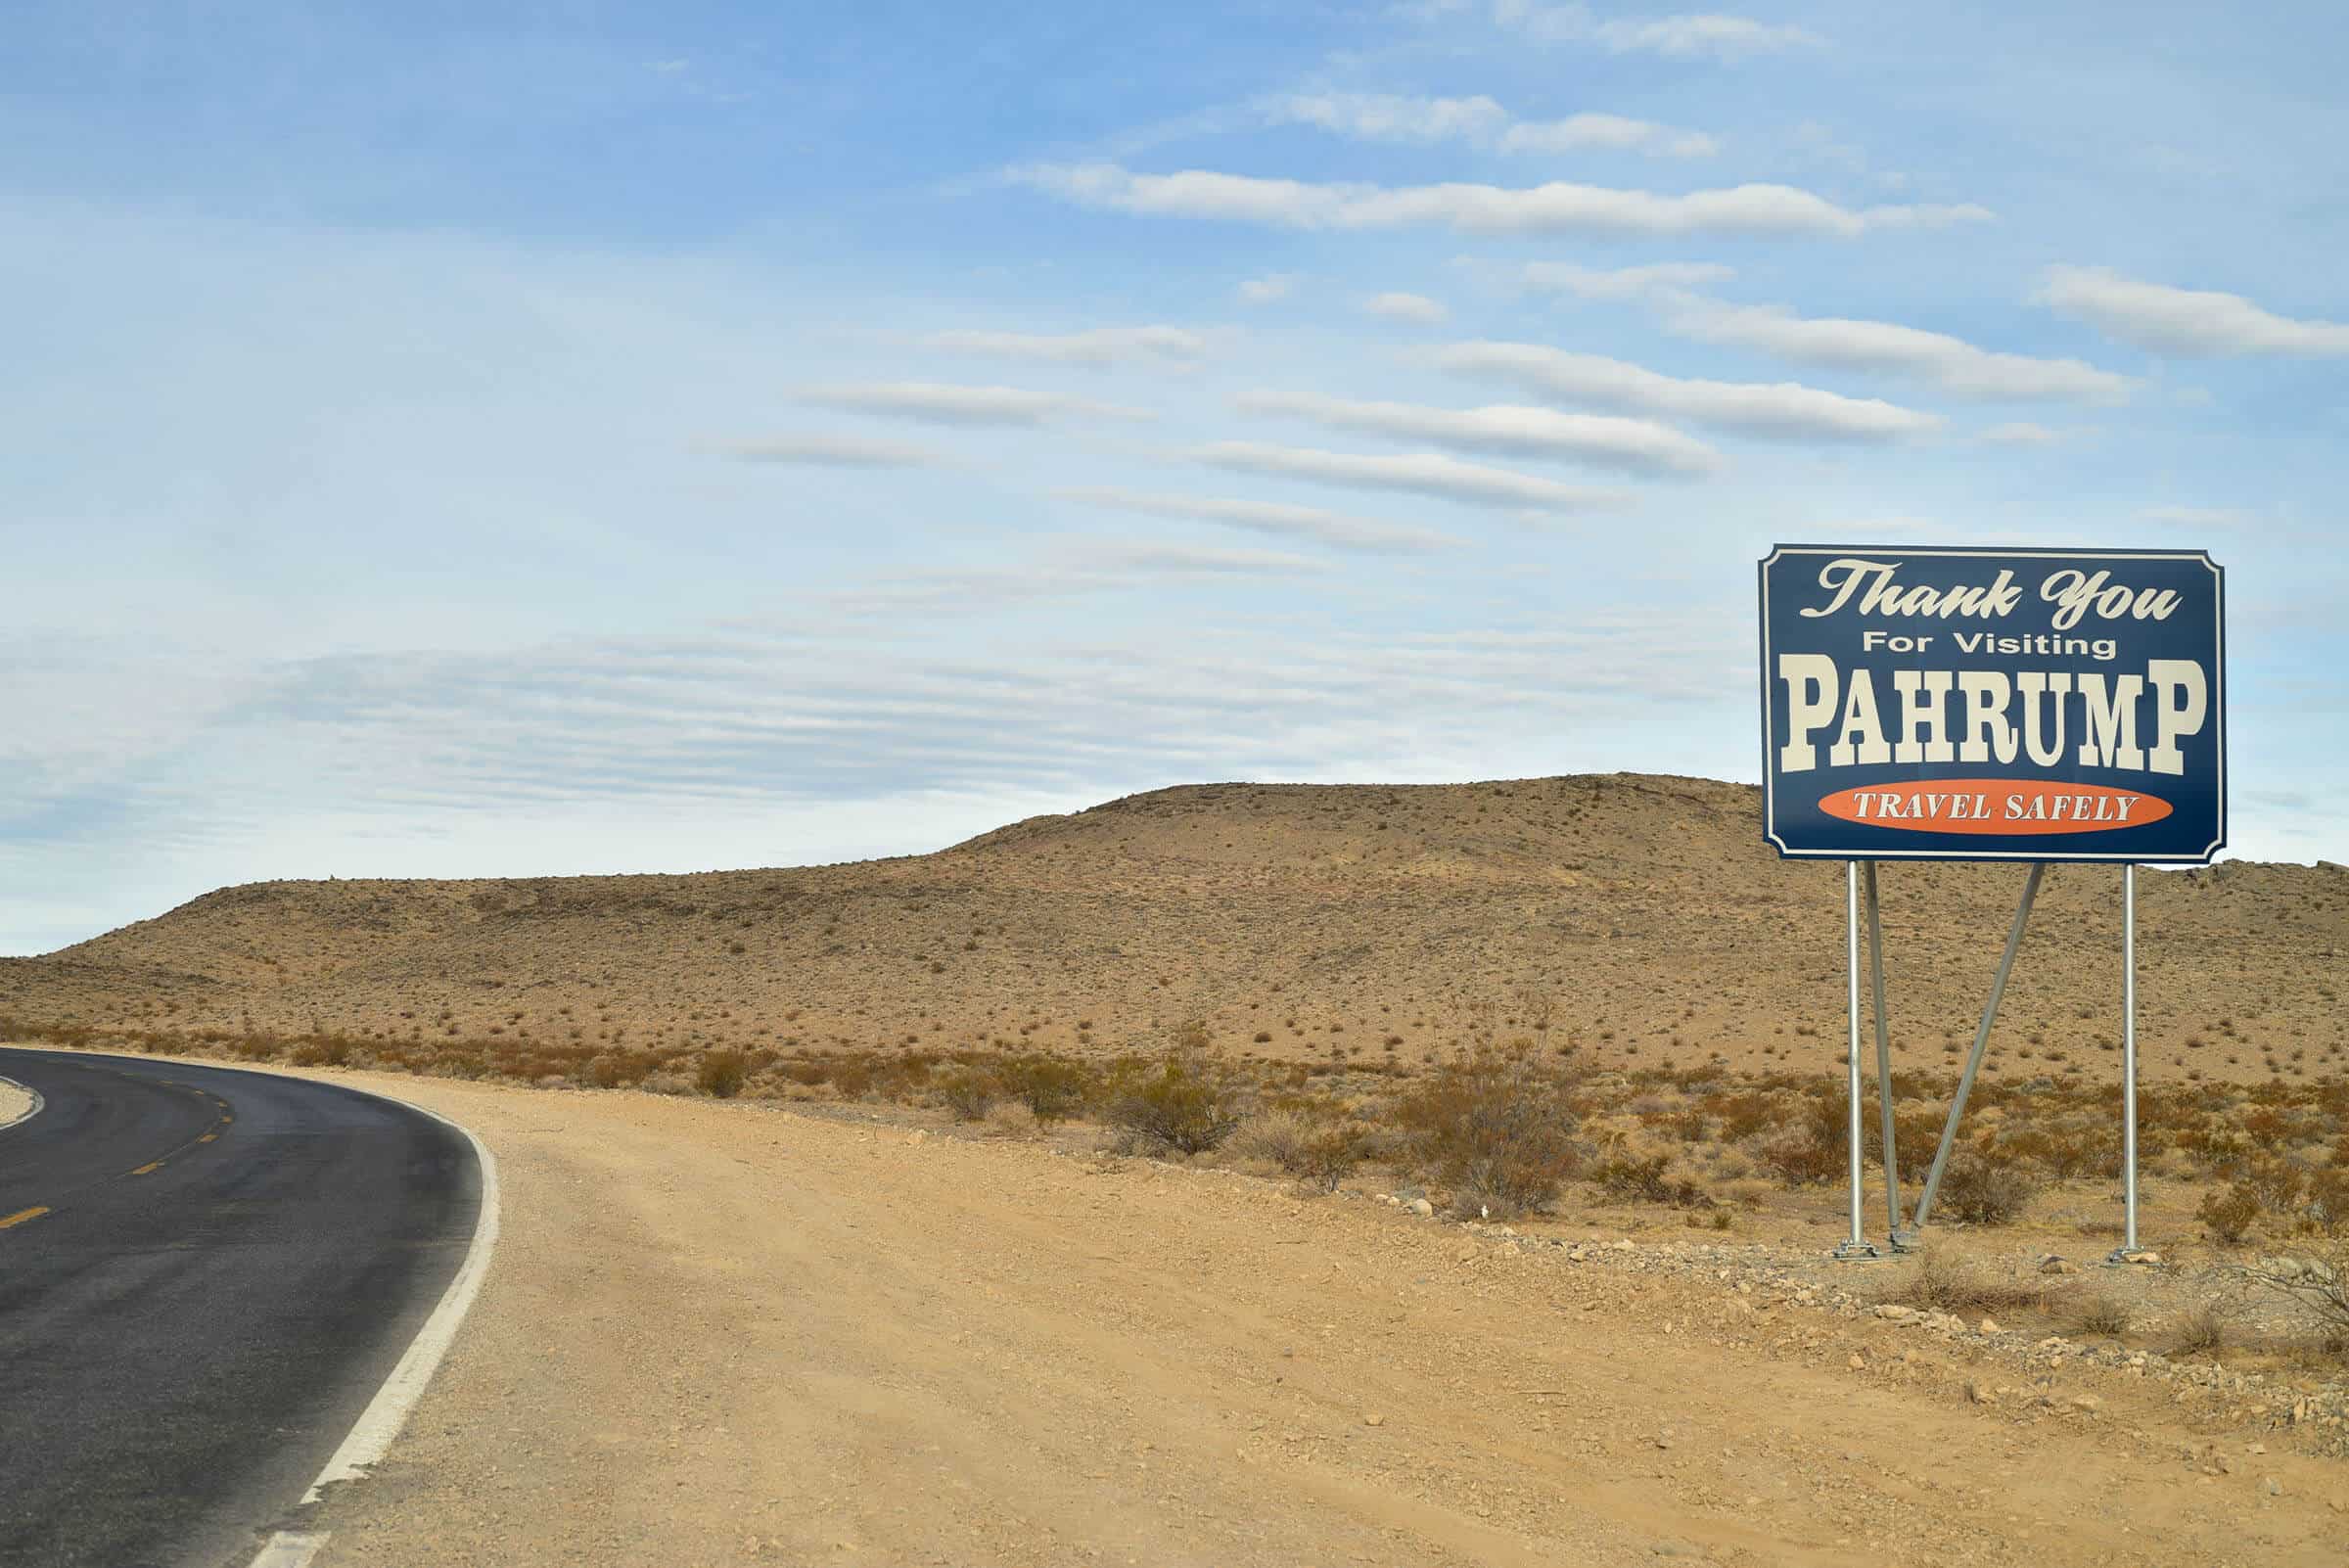 Decorative header image featuring the welcome to Pahrump sign with mountains in the distance